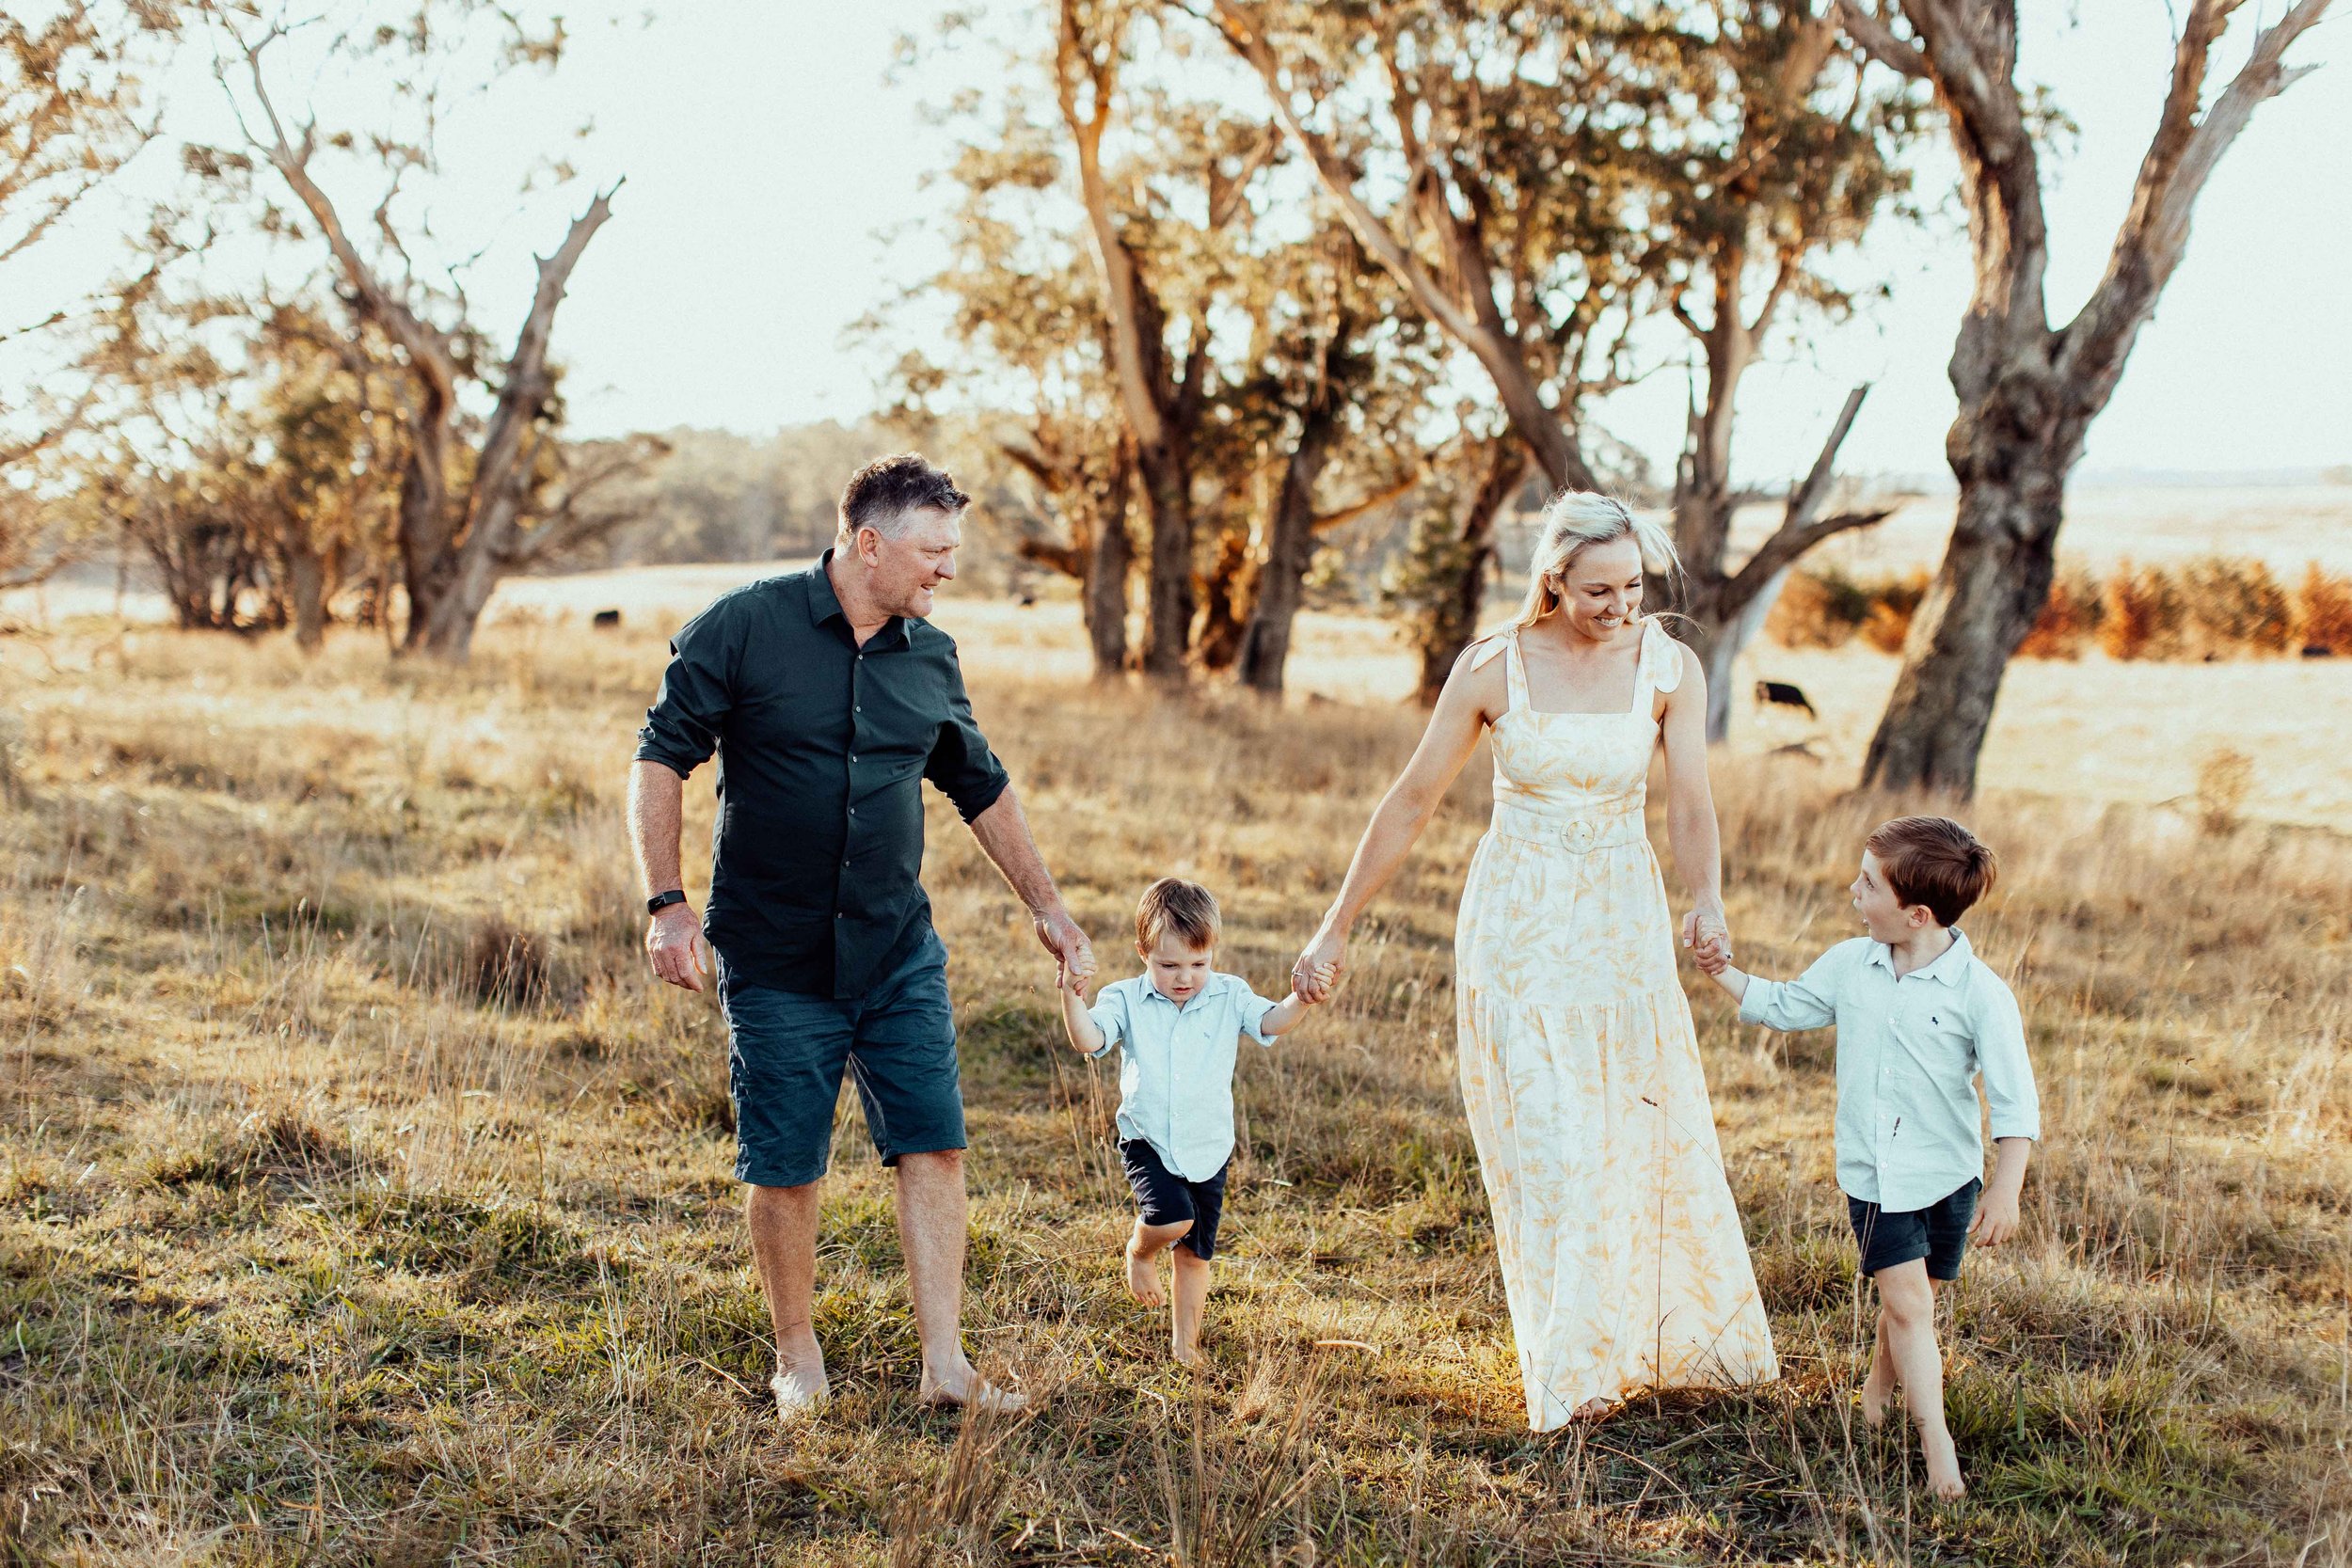 durney-family-exeter-southern-highlands-bowral-inhome-family-lifestyle-wollondilly-camden-macarthur-sydney-photography-www.emilyobrienphotography.net-38.jpg